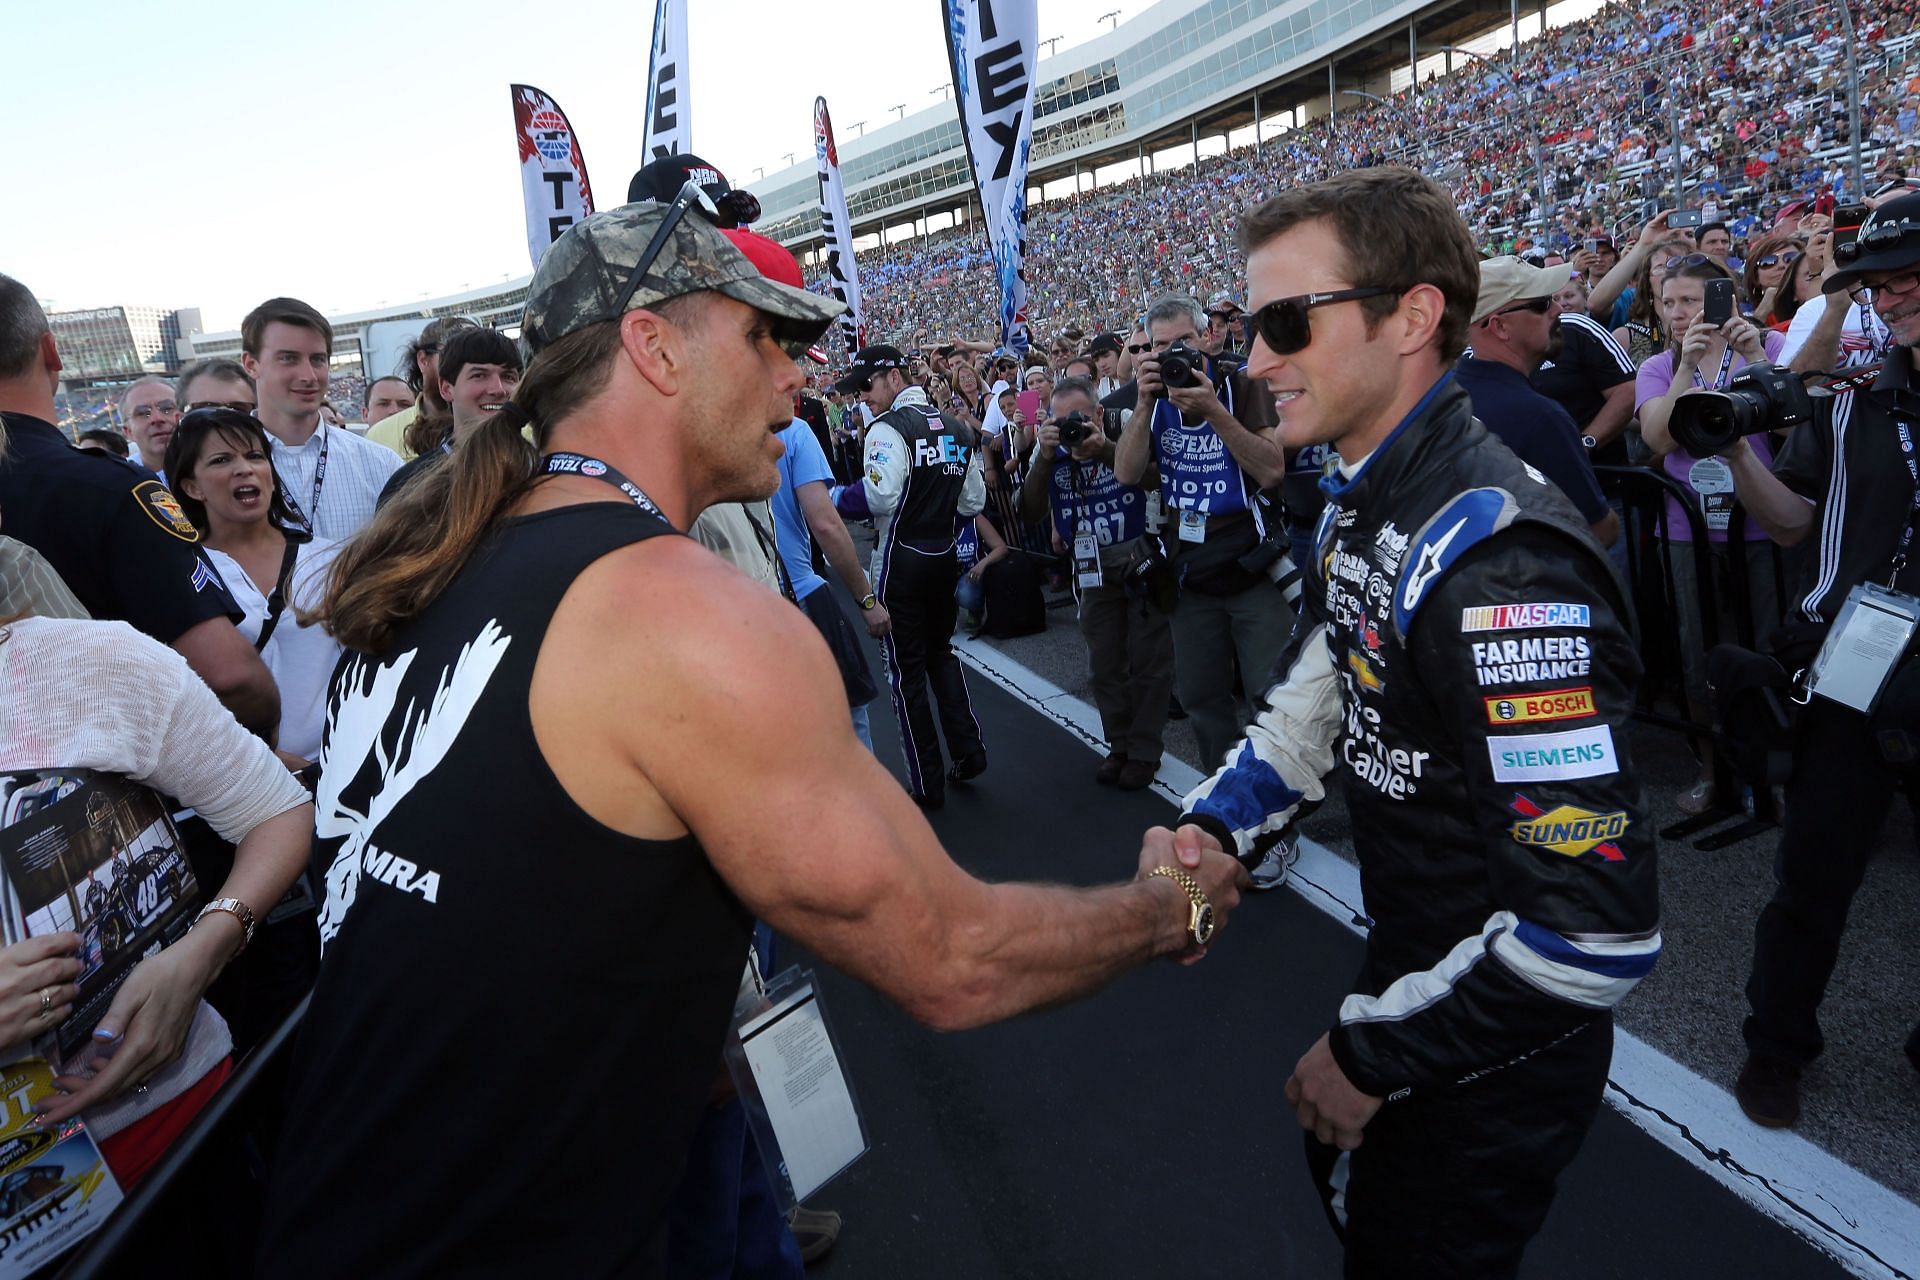 WWE Hall of Famer Shawn Michaels (L) shakes hands with Kasey Kahne (R), driver of the #5 Time Warner Cable Chevrolet, prior to the start of the NASCAR Sprint Cup Series NRA 500 at Texas Motor Speedway on April 13, 2013 in Fort Worth, Texas. (Photo by Jerry Markland/Getty Images)